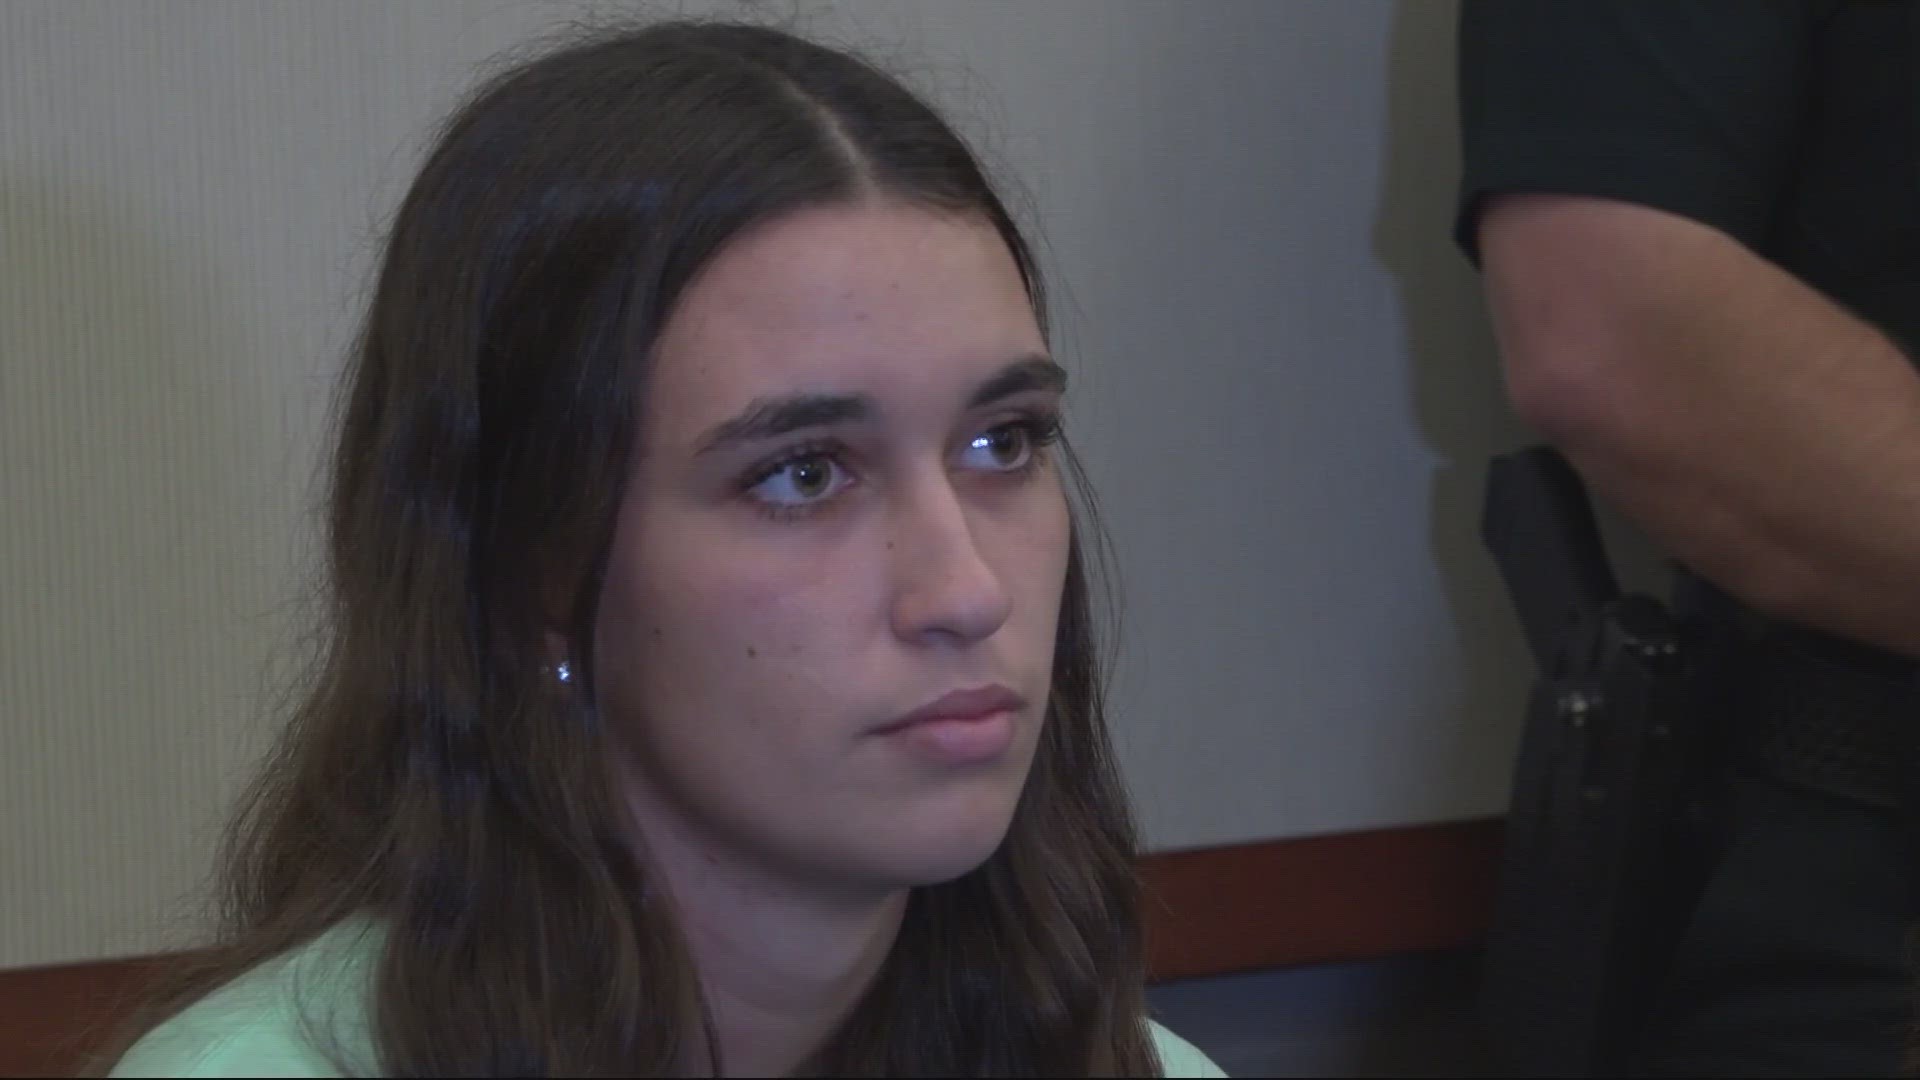 Madison discussed the amount of support she's received since suffering injuries in a tragic June 3 Ponte Vedra stabbing incident in a press conference held Friday.